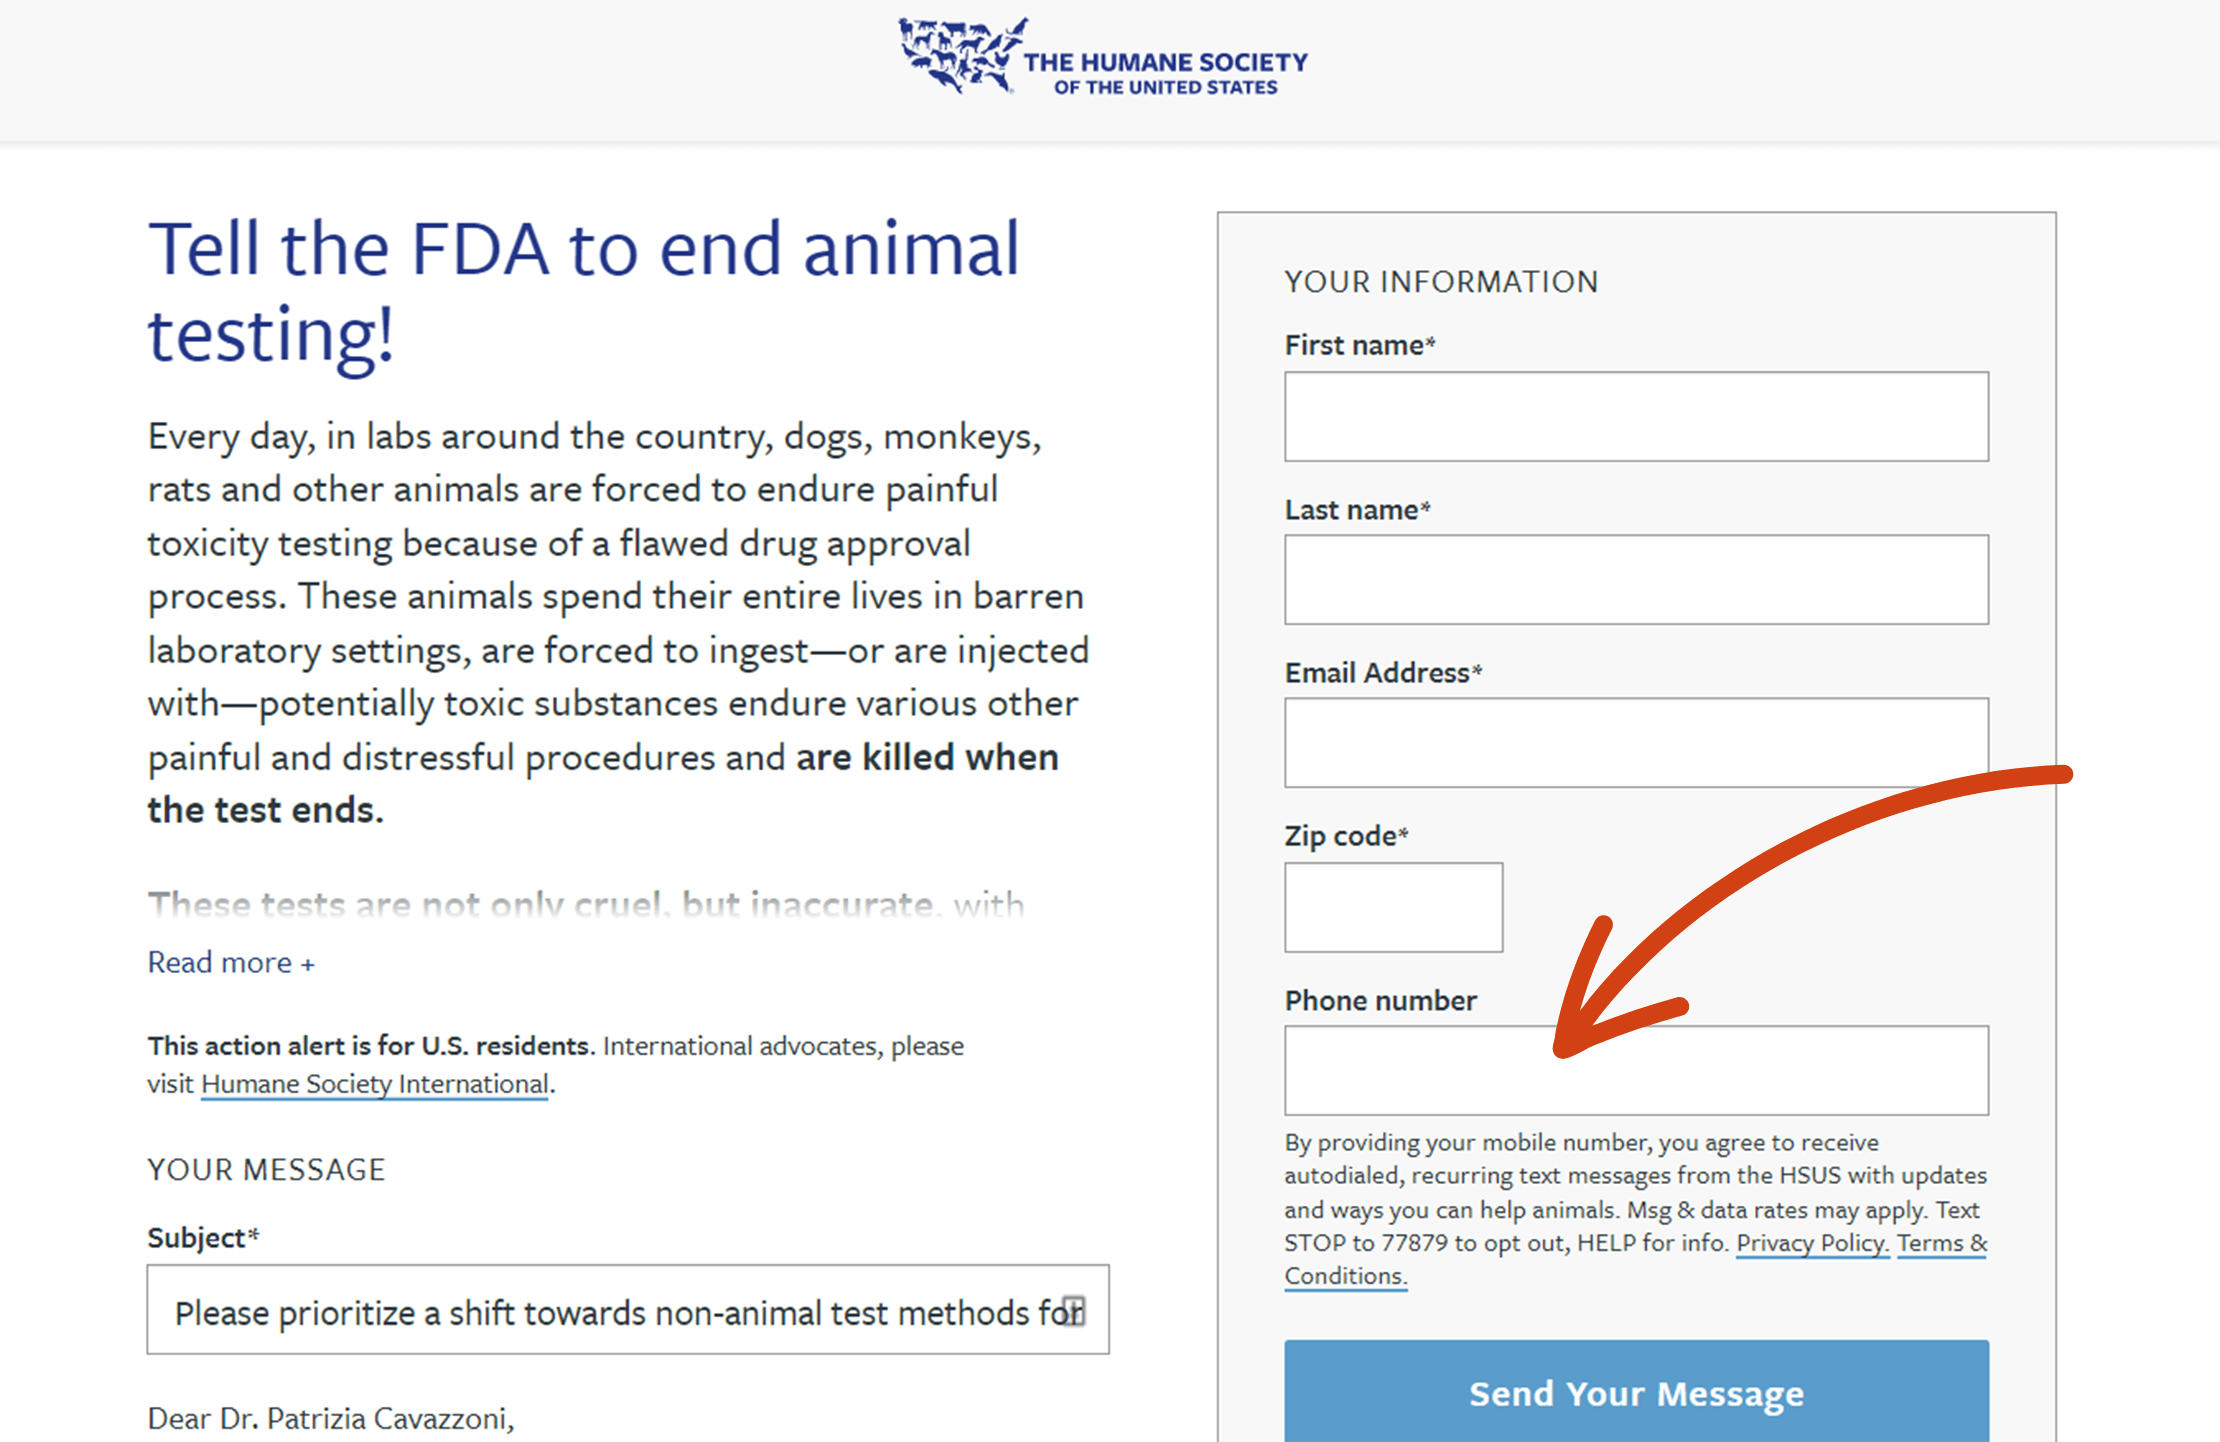 Advocacy alert form from The Humane Society